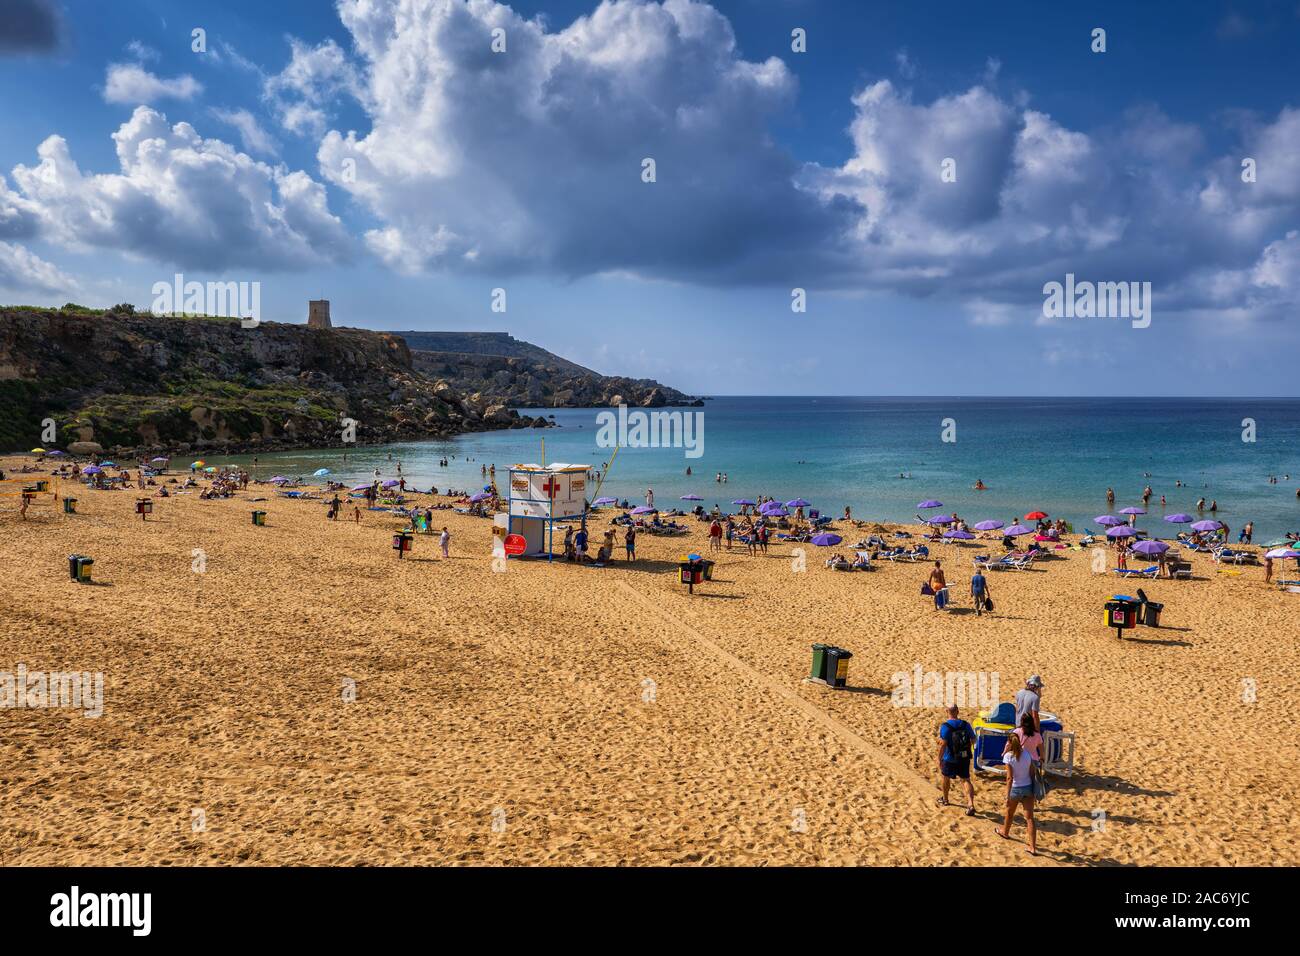 People relax at the Golden Bay sandy beach resort in the north-west coast of Malta island in the Mediterranean Sea Stock Photo